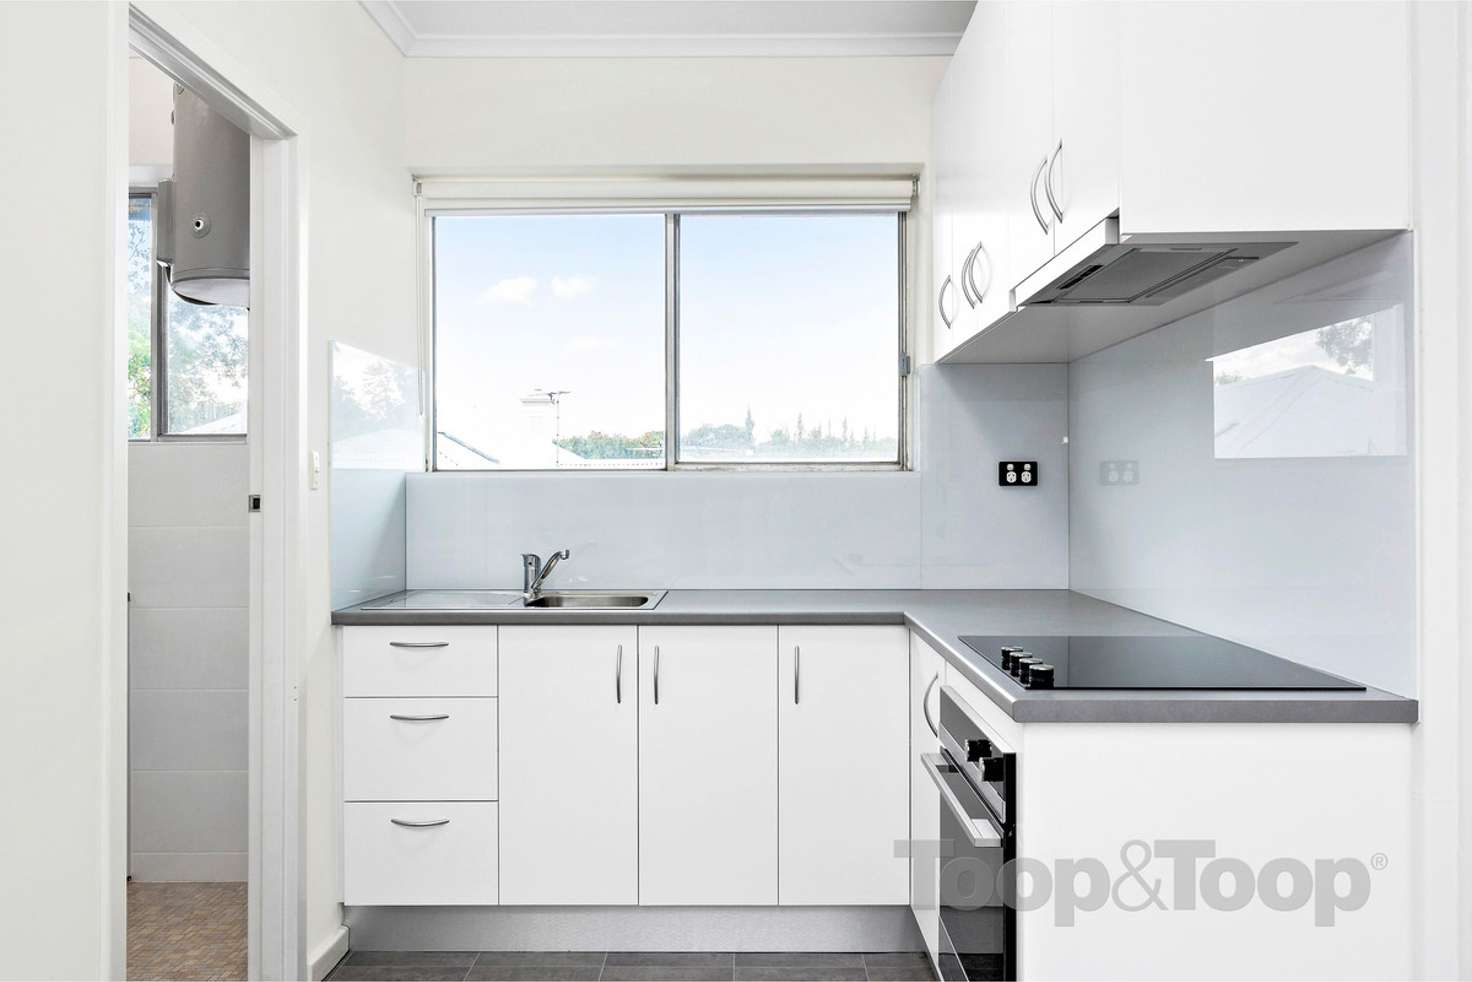 Main view of Homely unit listing, 5/73 George Street, Norwood SA 5067